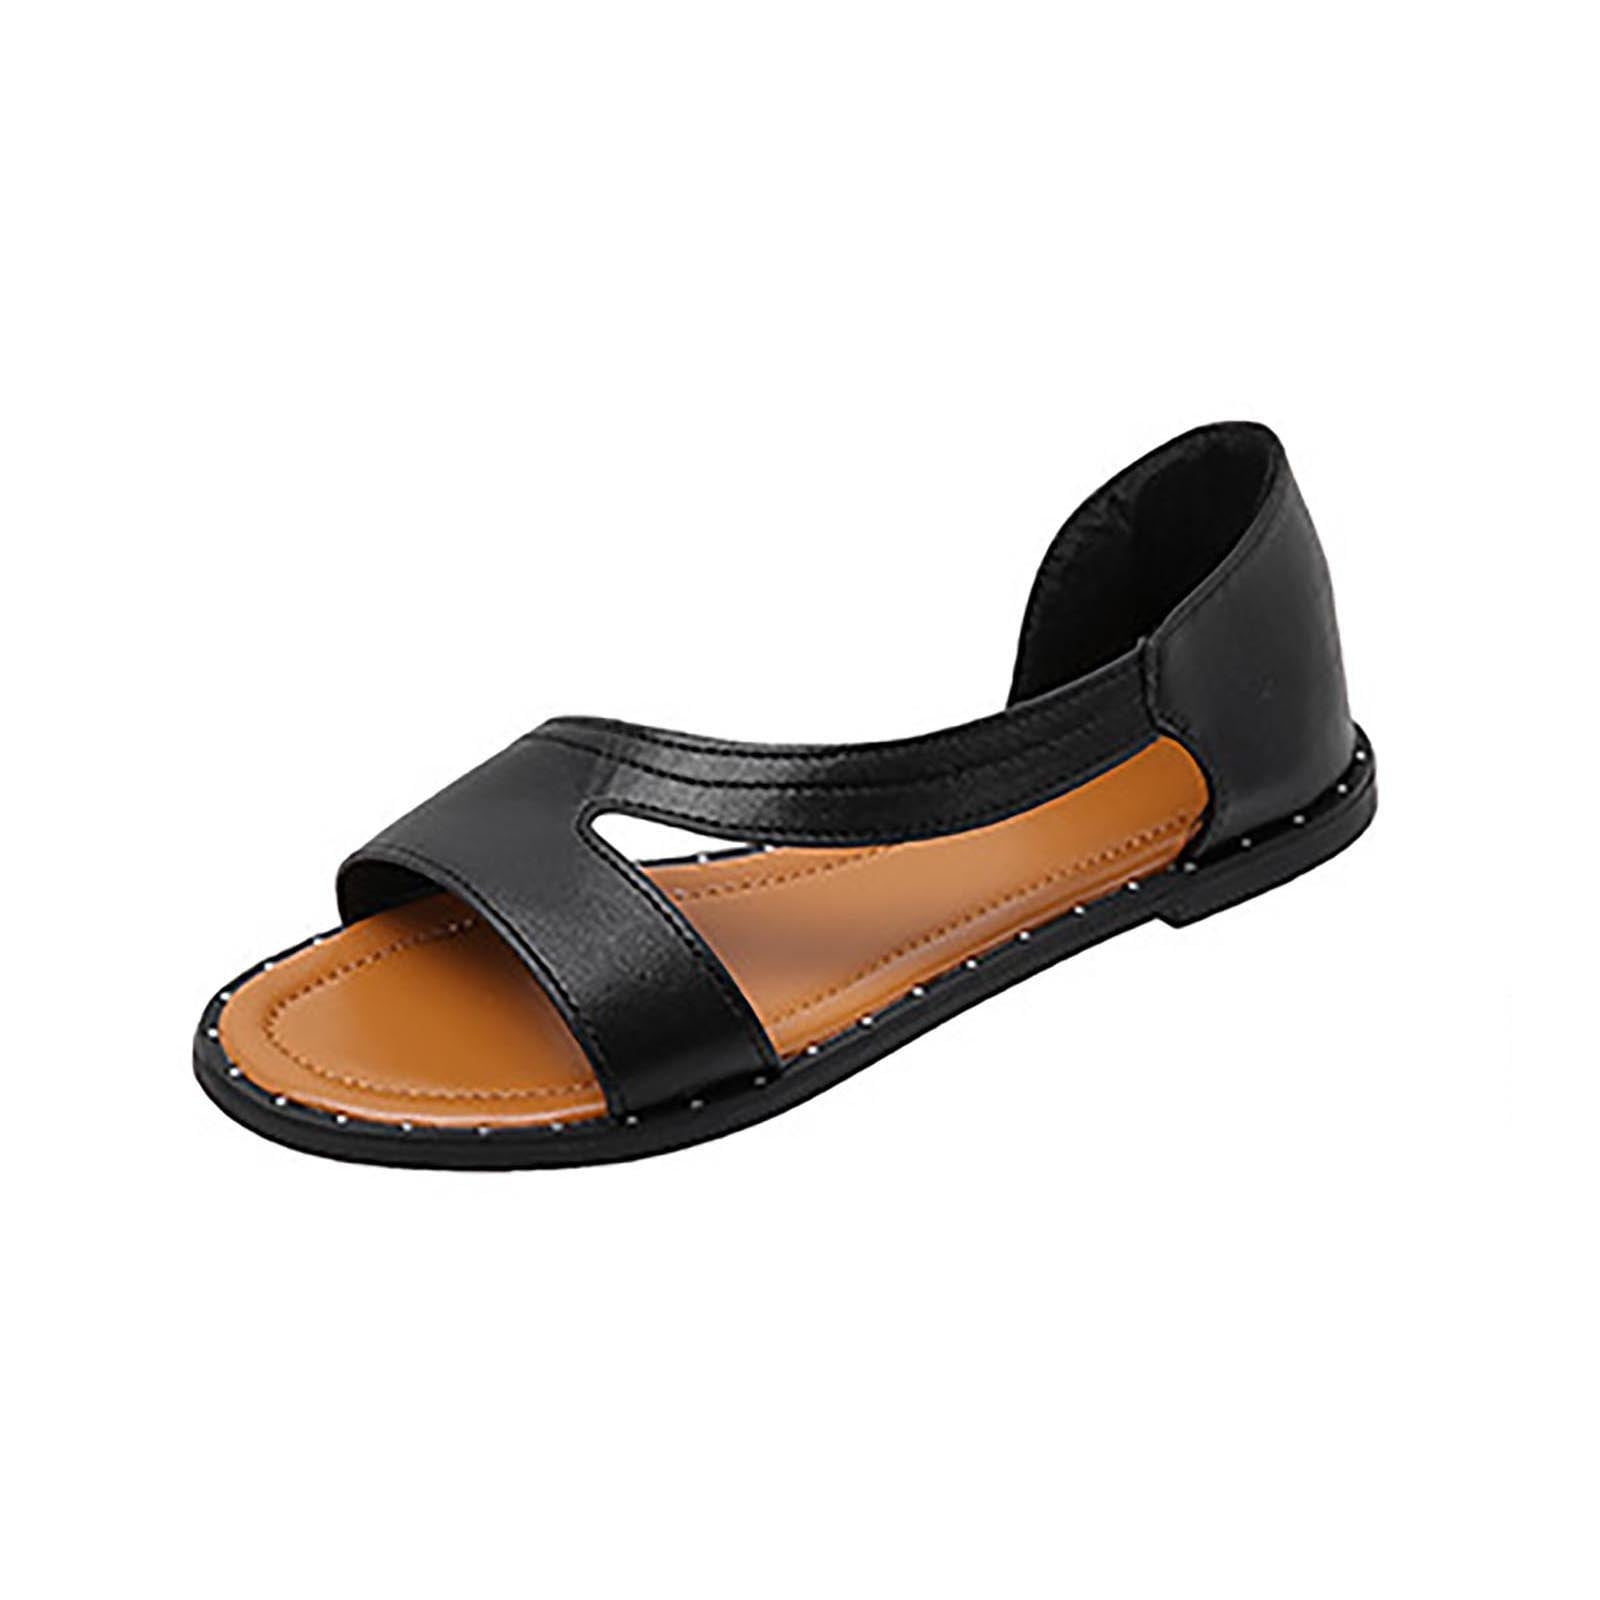 sandals, classic trendy girls summer heels and sandals 2023, flat sandals  for girls, stylish black heel sandals for girl… | Pretty sandals, Girly  shoes, Girls shoes